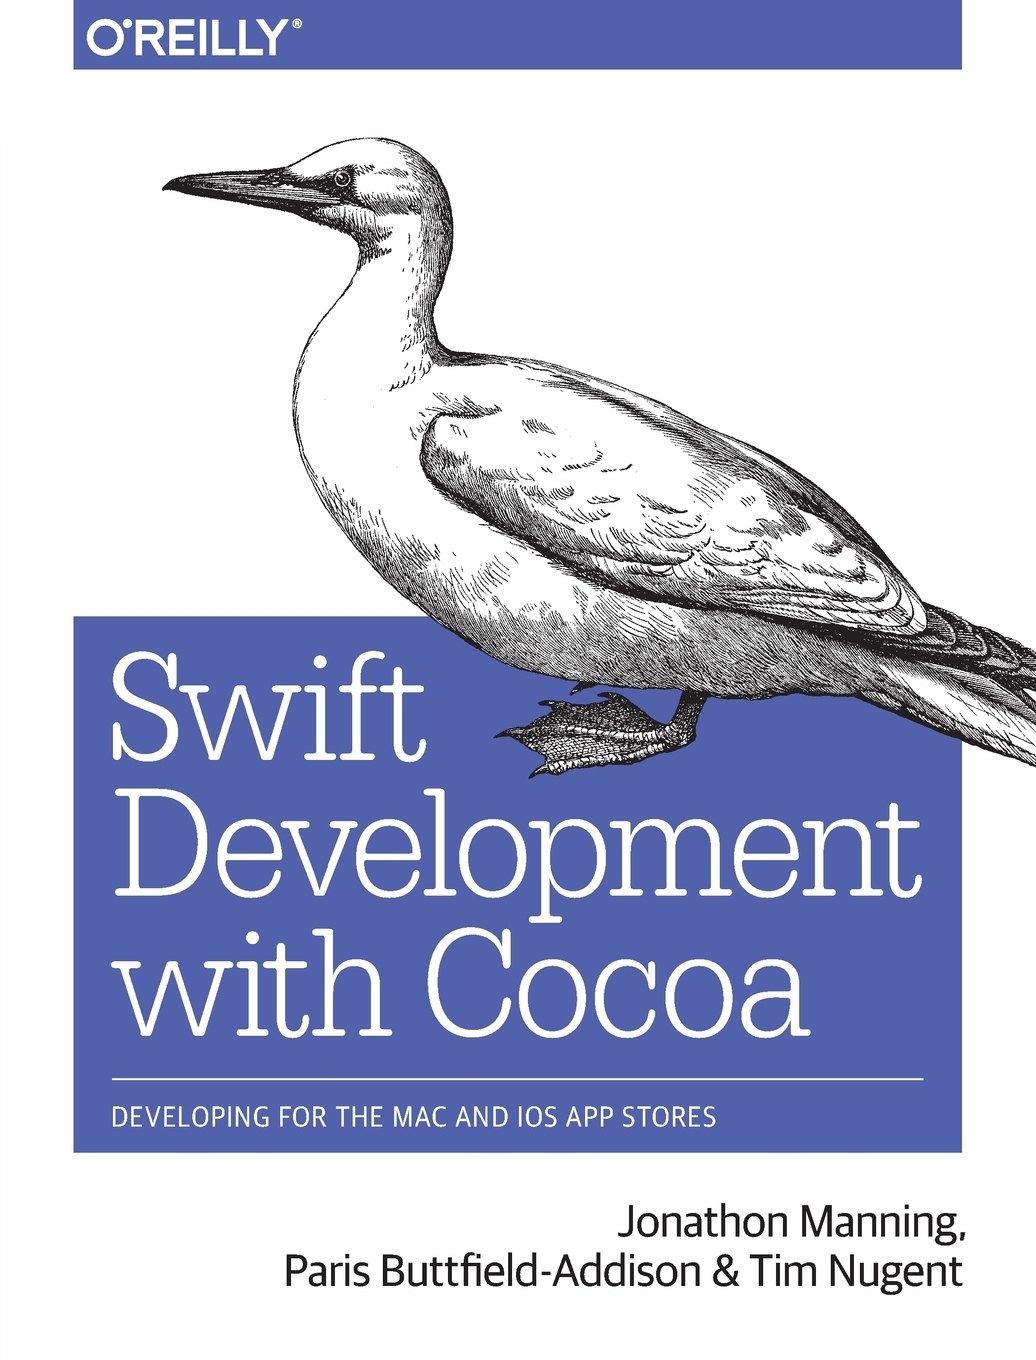 Cocoa Office For Mac